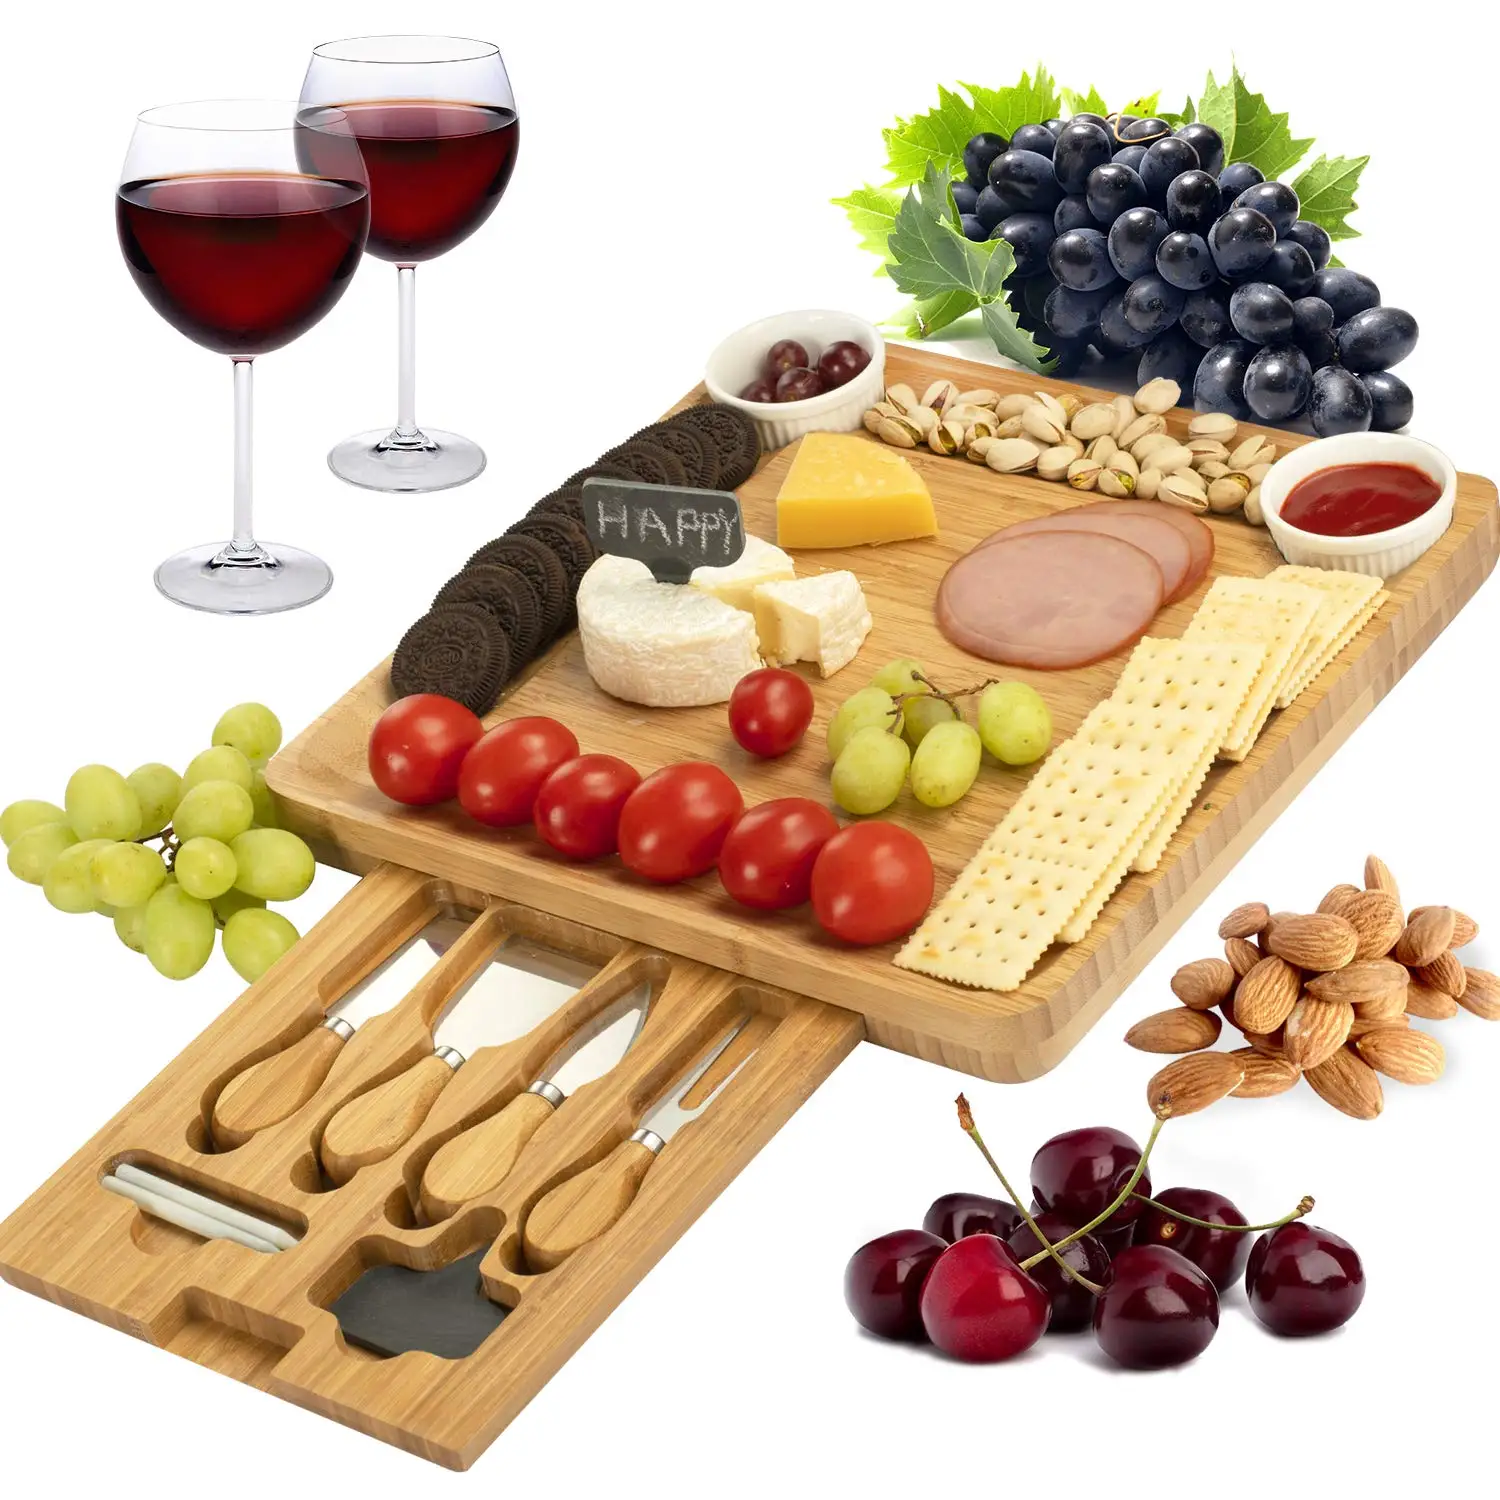 Brie and Meat Crackers Antipasti with Lid Dome Storage Round with Cover Cosh Buffet Fruit Cheese Board Cover Bamboo Round Wooden Cake Box Serving Platter Platter & Serving Tray for Wine 